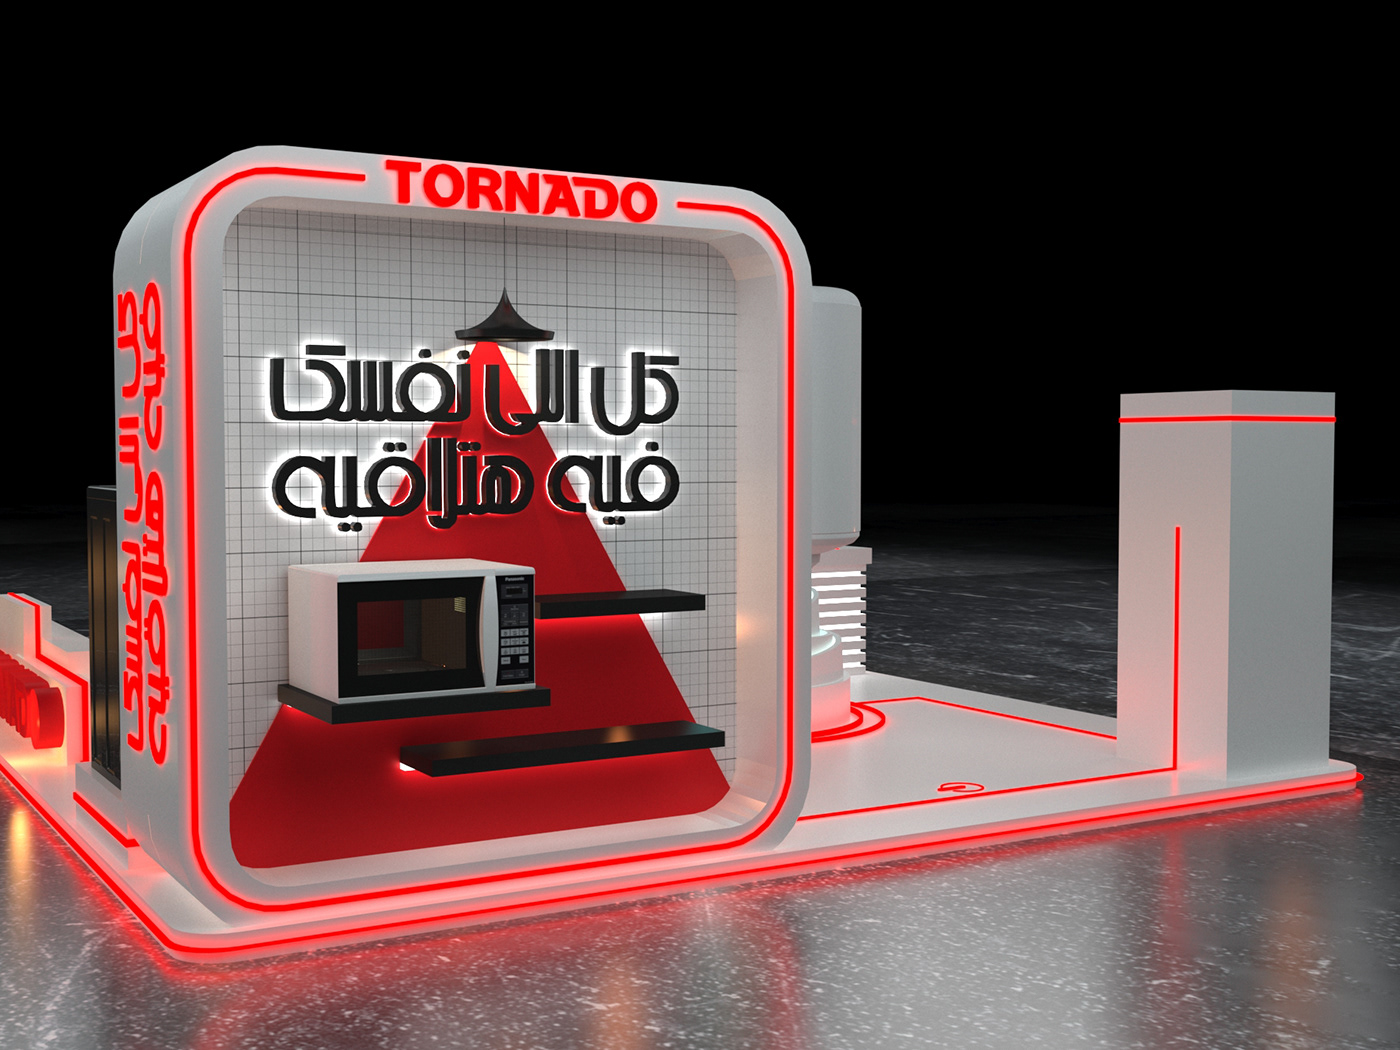 3DDesign activationbooth booth Display exhbo Kiosk Stand tornado